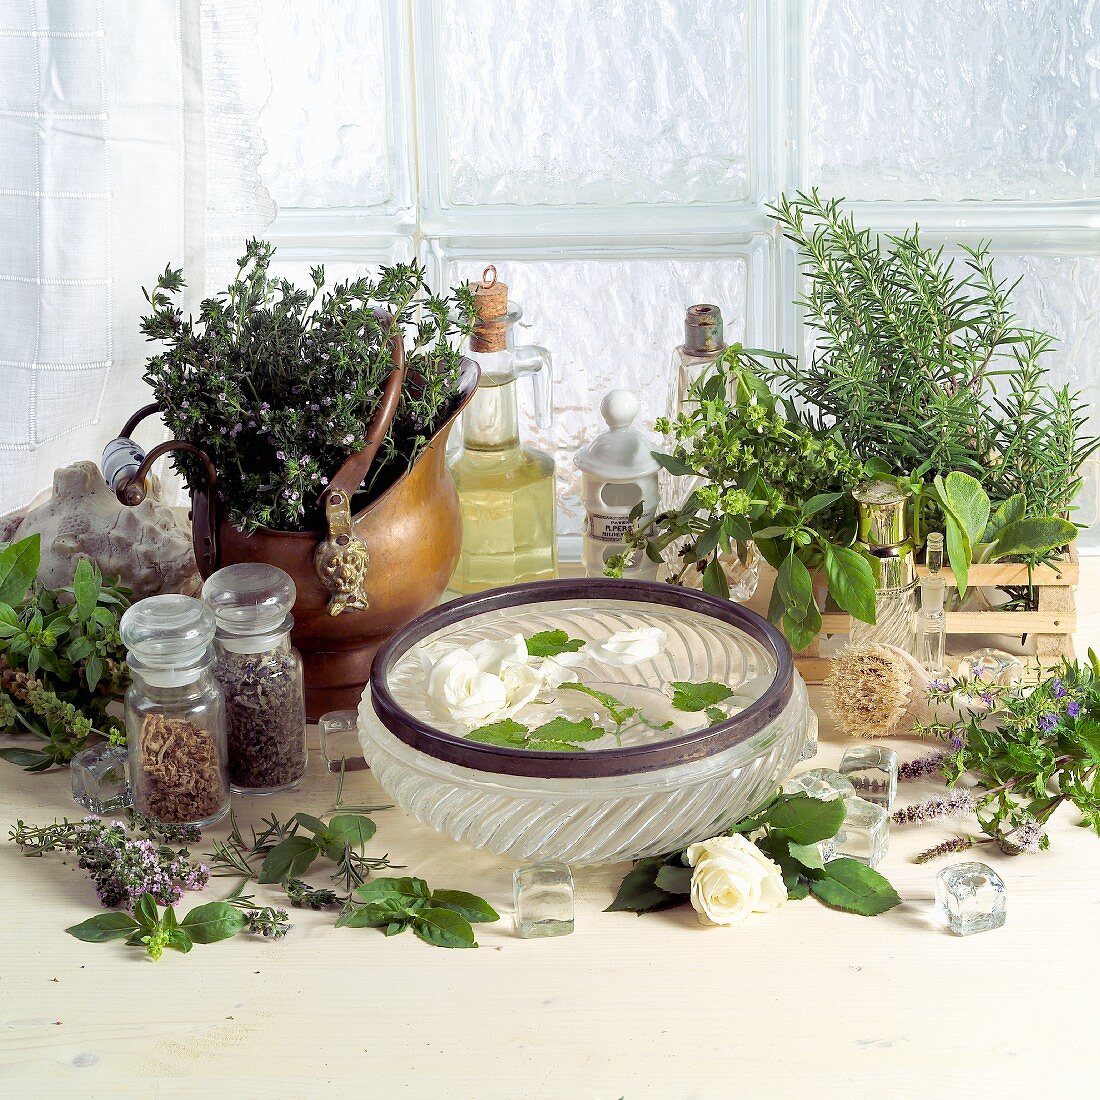 Aromatic herbs, rose petals and beauty products